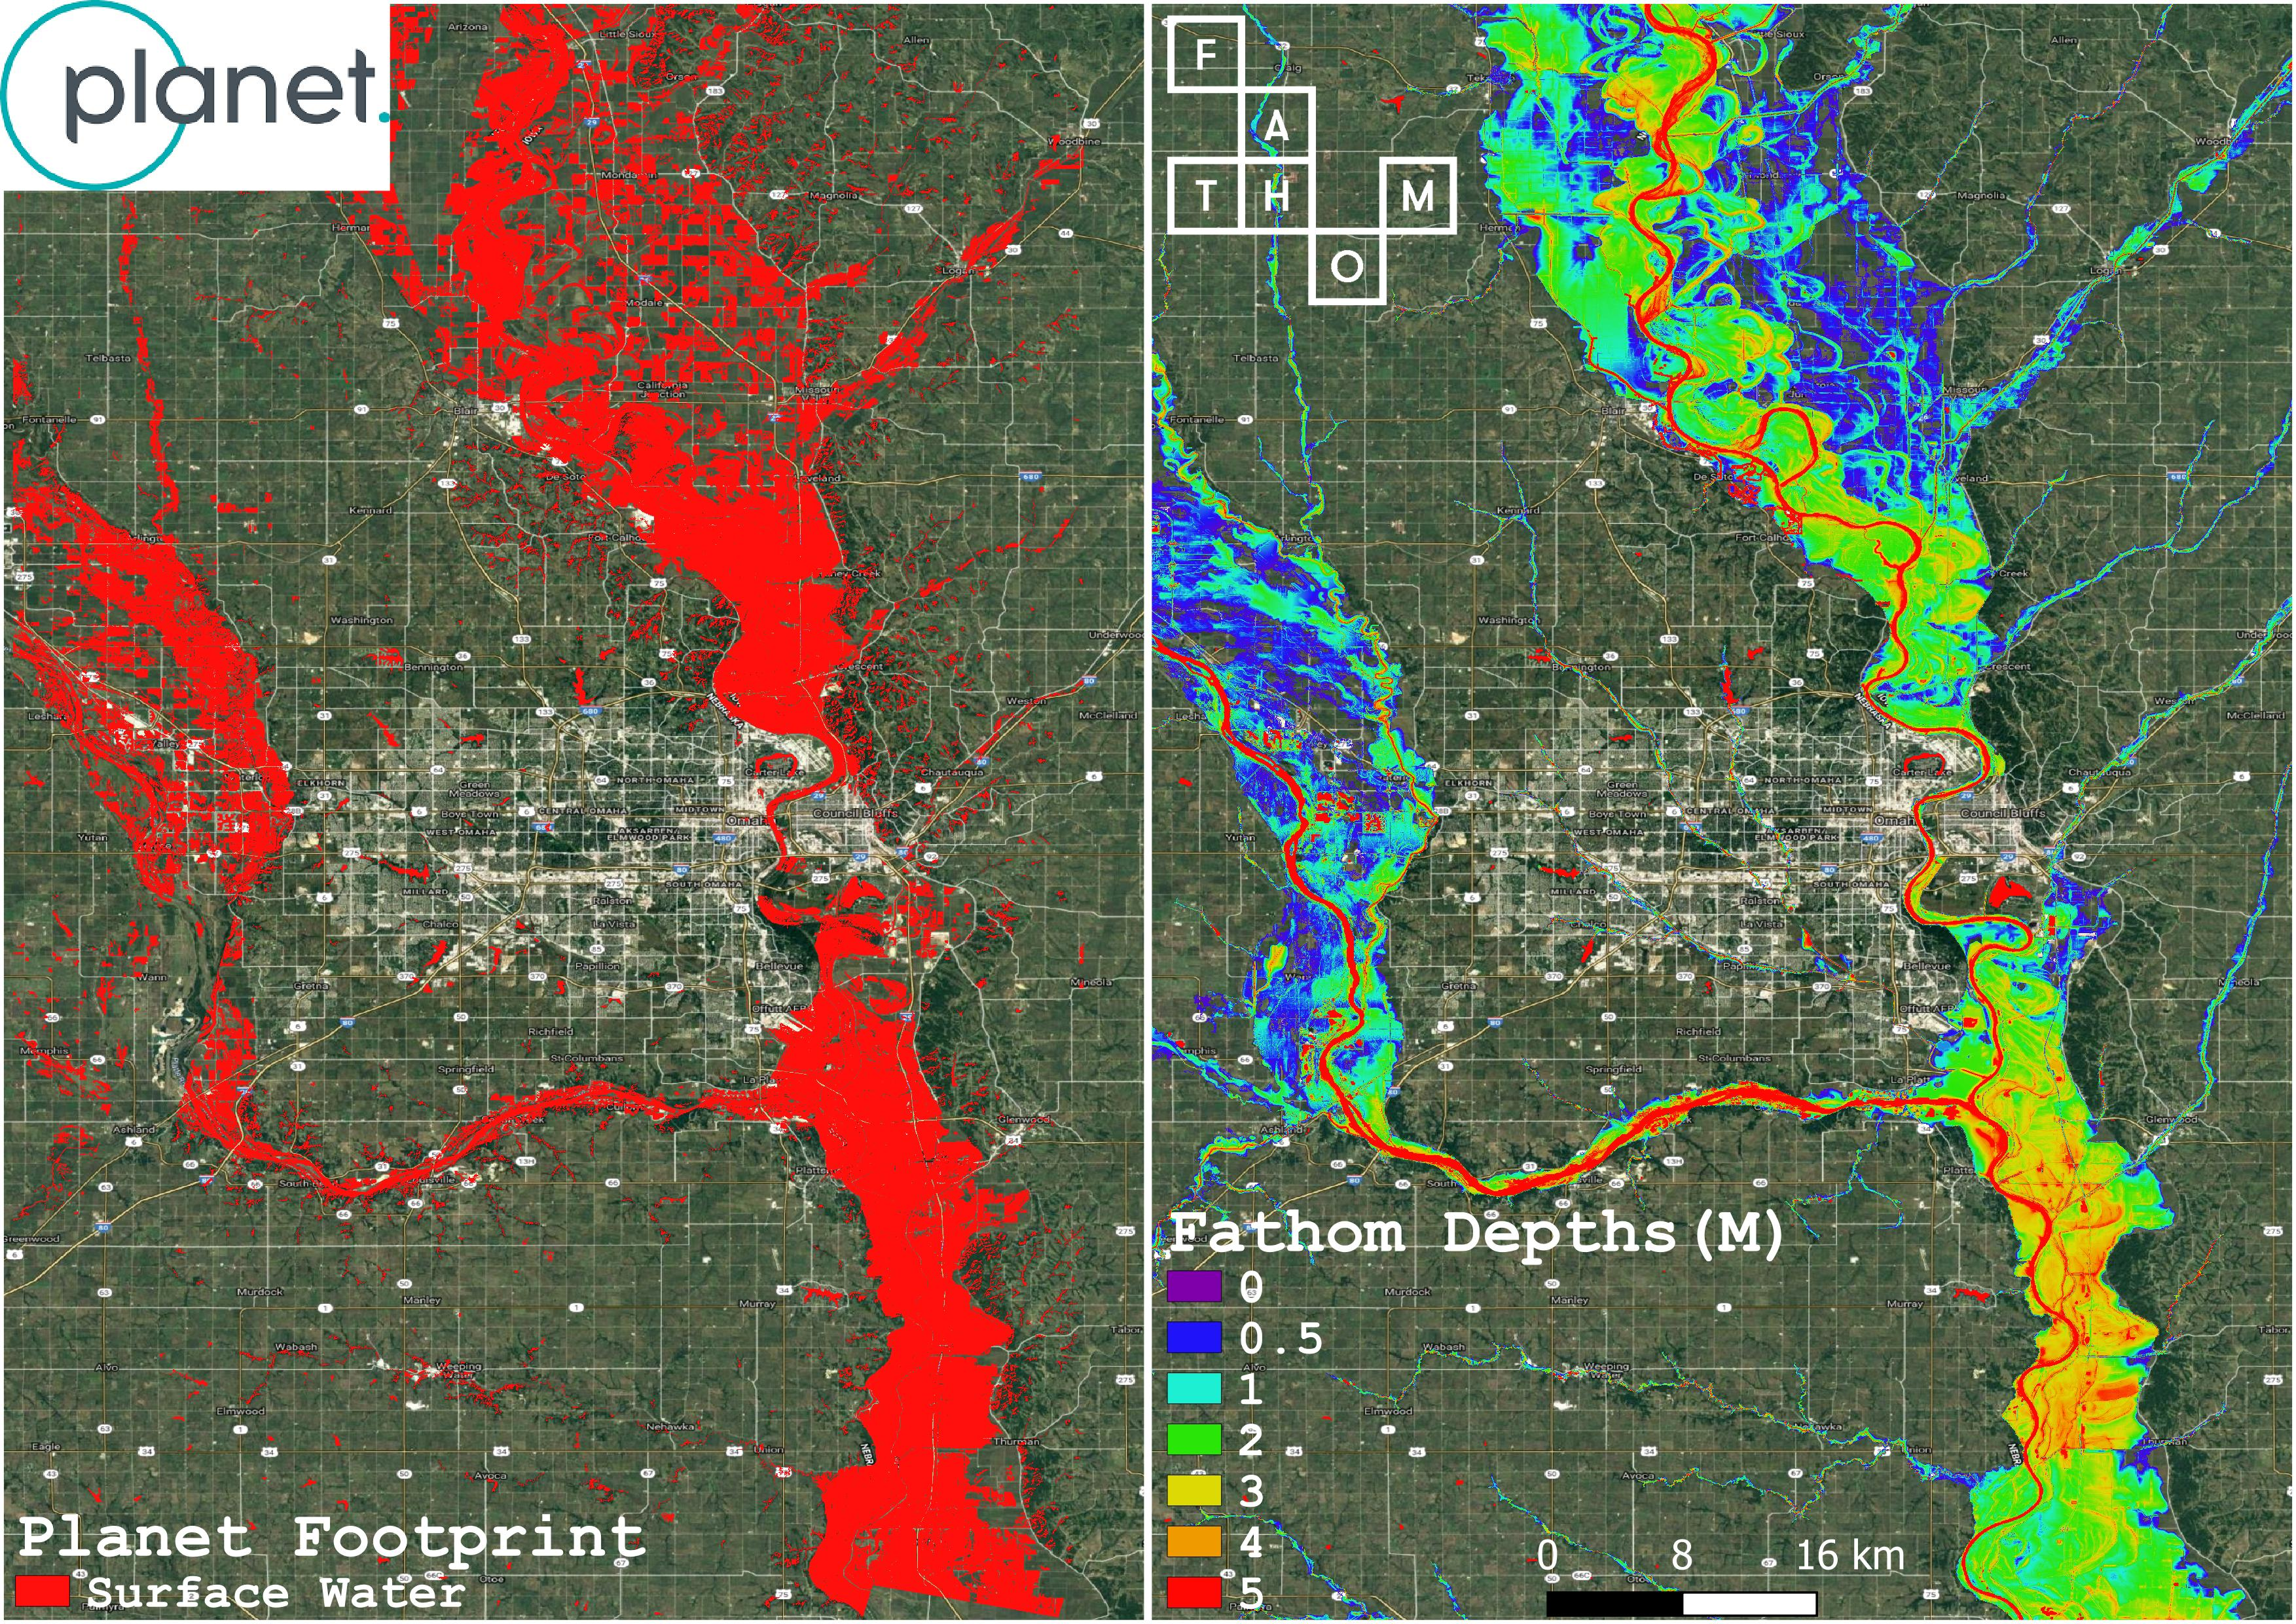 In Omaha, Nebraska, on March 22nd, 2019, amid inundating flood events, Fathom employed a geospatial analysis technique termed the Normalized Difference Water Index (NDWI). This methodology was implemented on PlanetScope imagery, which comprises four distinct spectral bands. Its primary objective was to discern and designate surface water features during the apex of the catastrophic flooding events that plagued the state of Nebraska (left). Subsequently, these derived NDWI values were juxtaposed against Fathom's computational models. The principal aim of this comparative analysis was to ascertain and quantify what can be referred to as the "event magnitude" pertaining to each distinct river catchment within the affected region. Event magnitudes could in principle offer more fine-tuning to the automation of parametric insurance. Source: Fathom Maps from a Planet article by Brittany Zajic, used under a fair use rationale. 